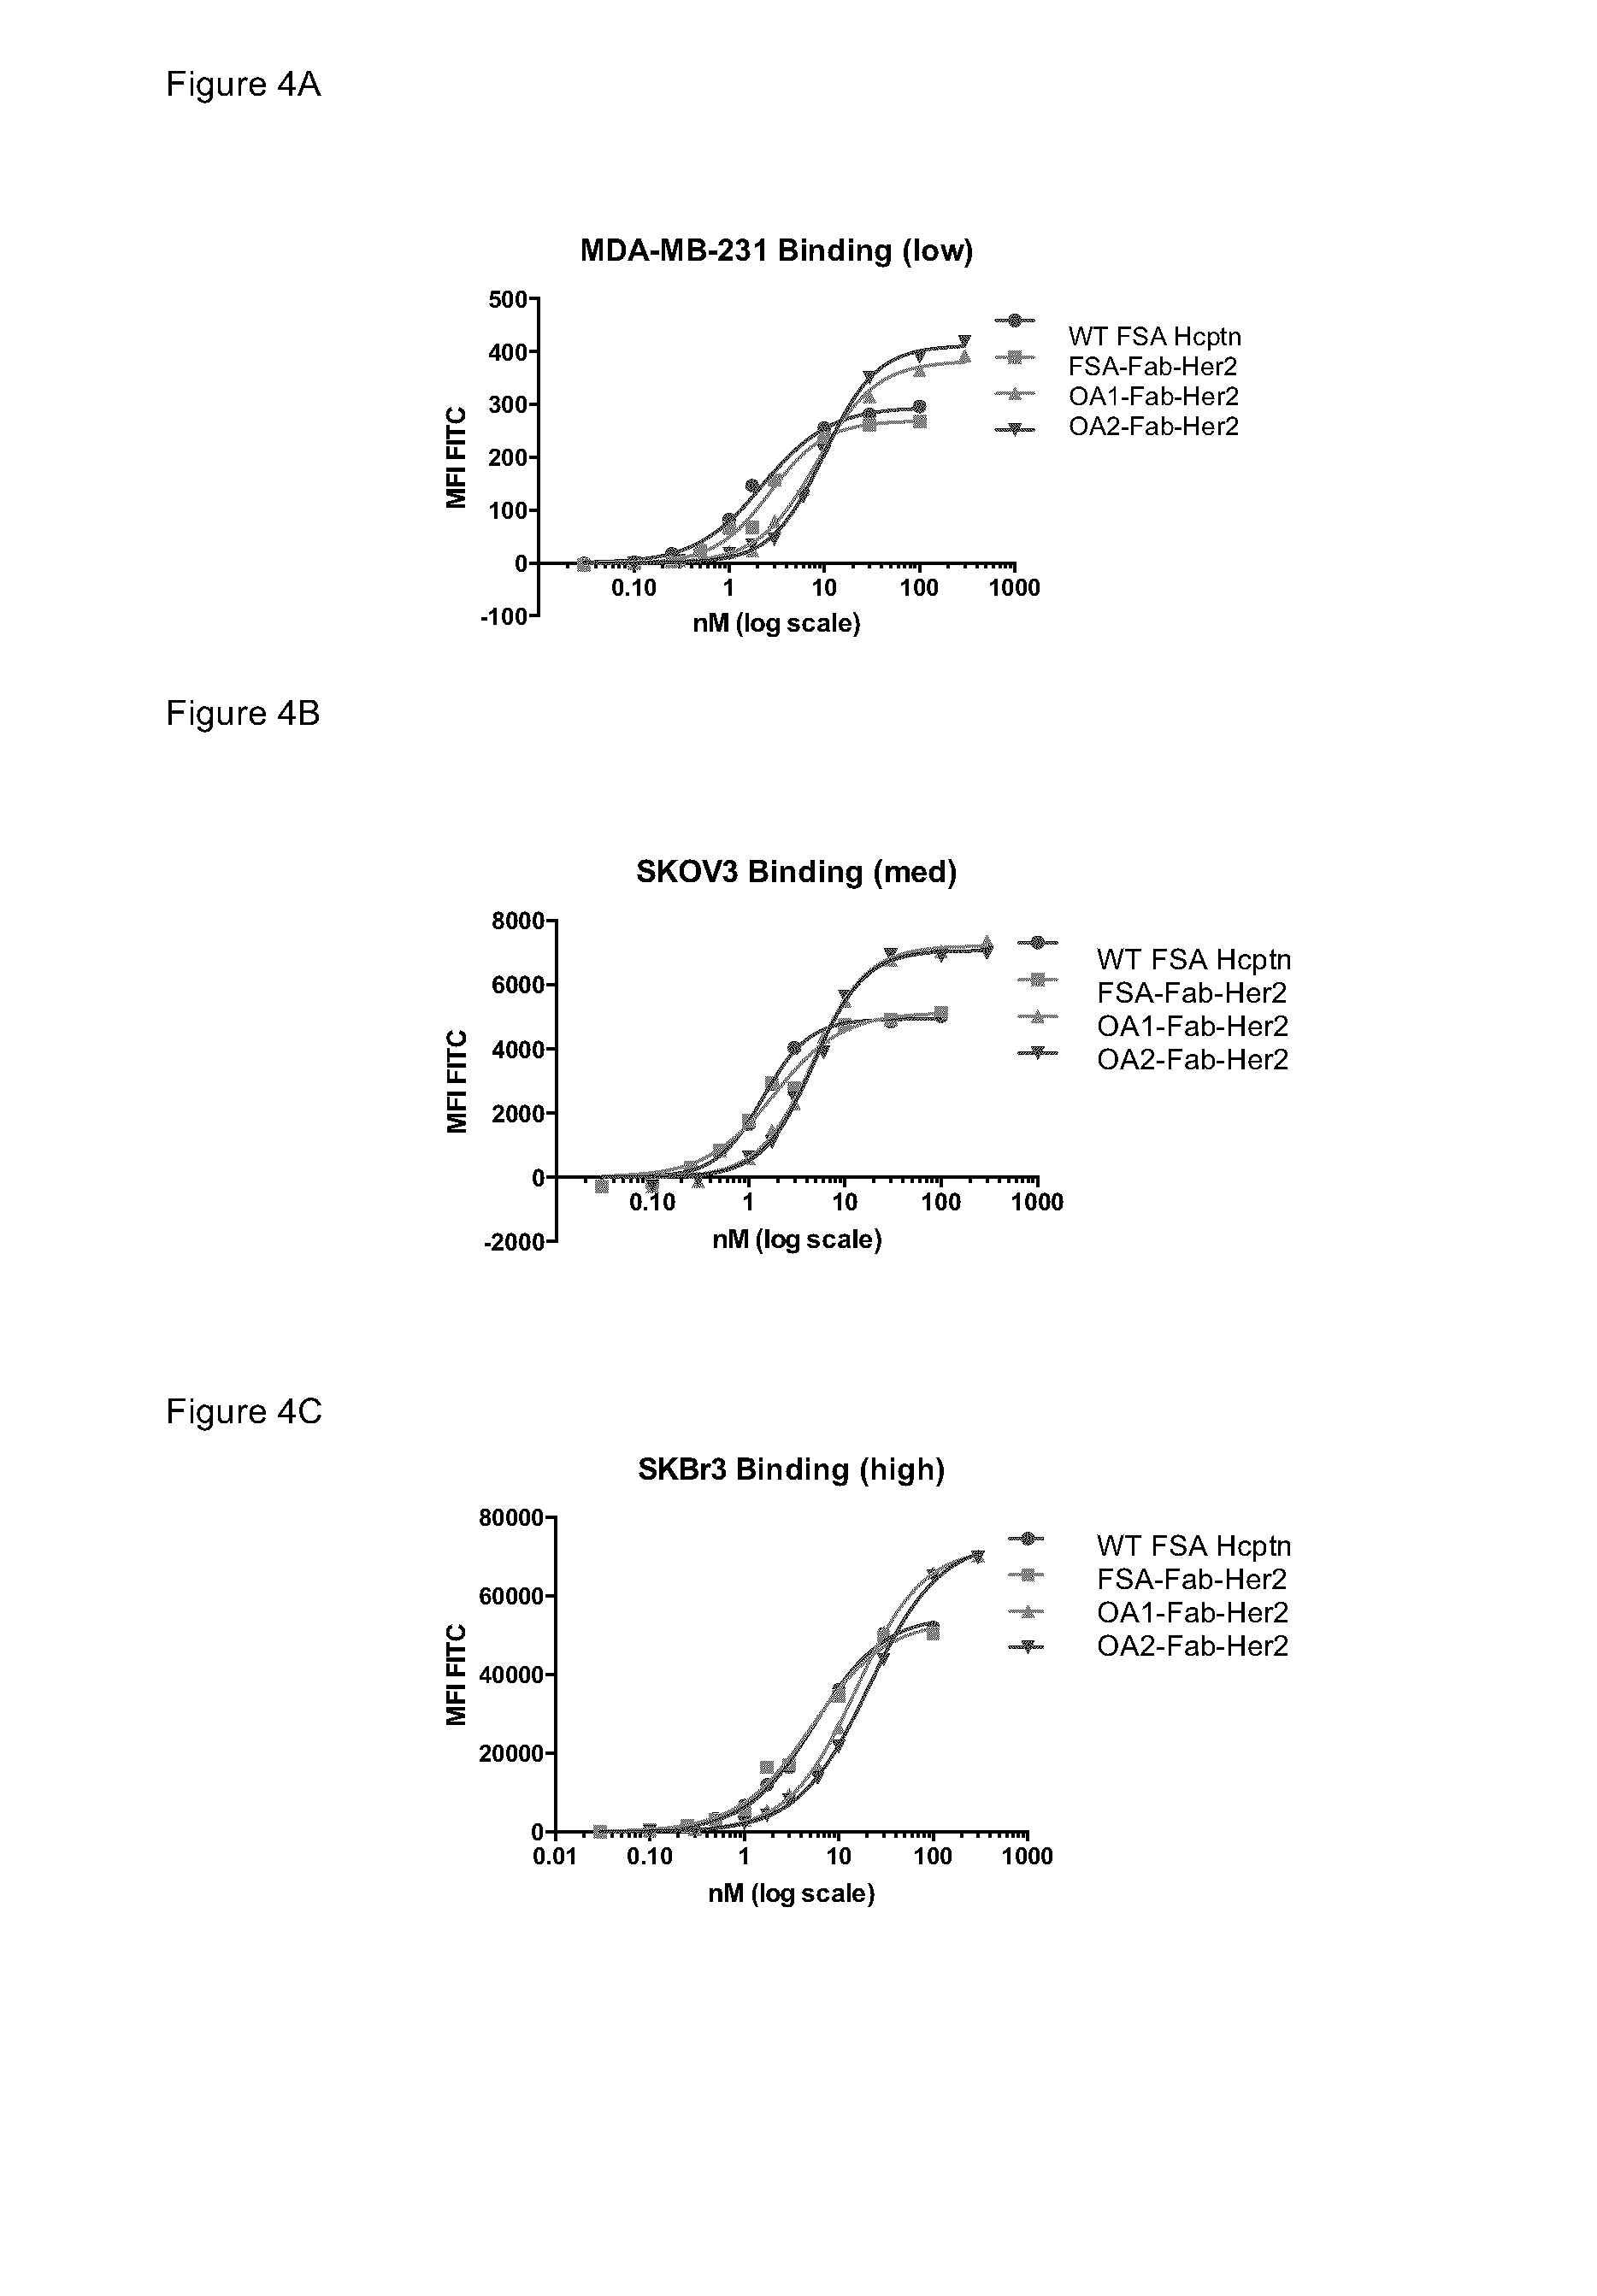 Single-Arm Monovalent Antibody Constructs and Uses Thereof